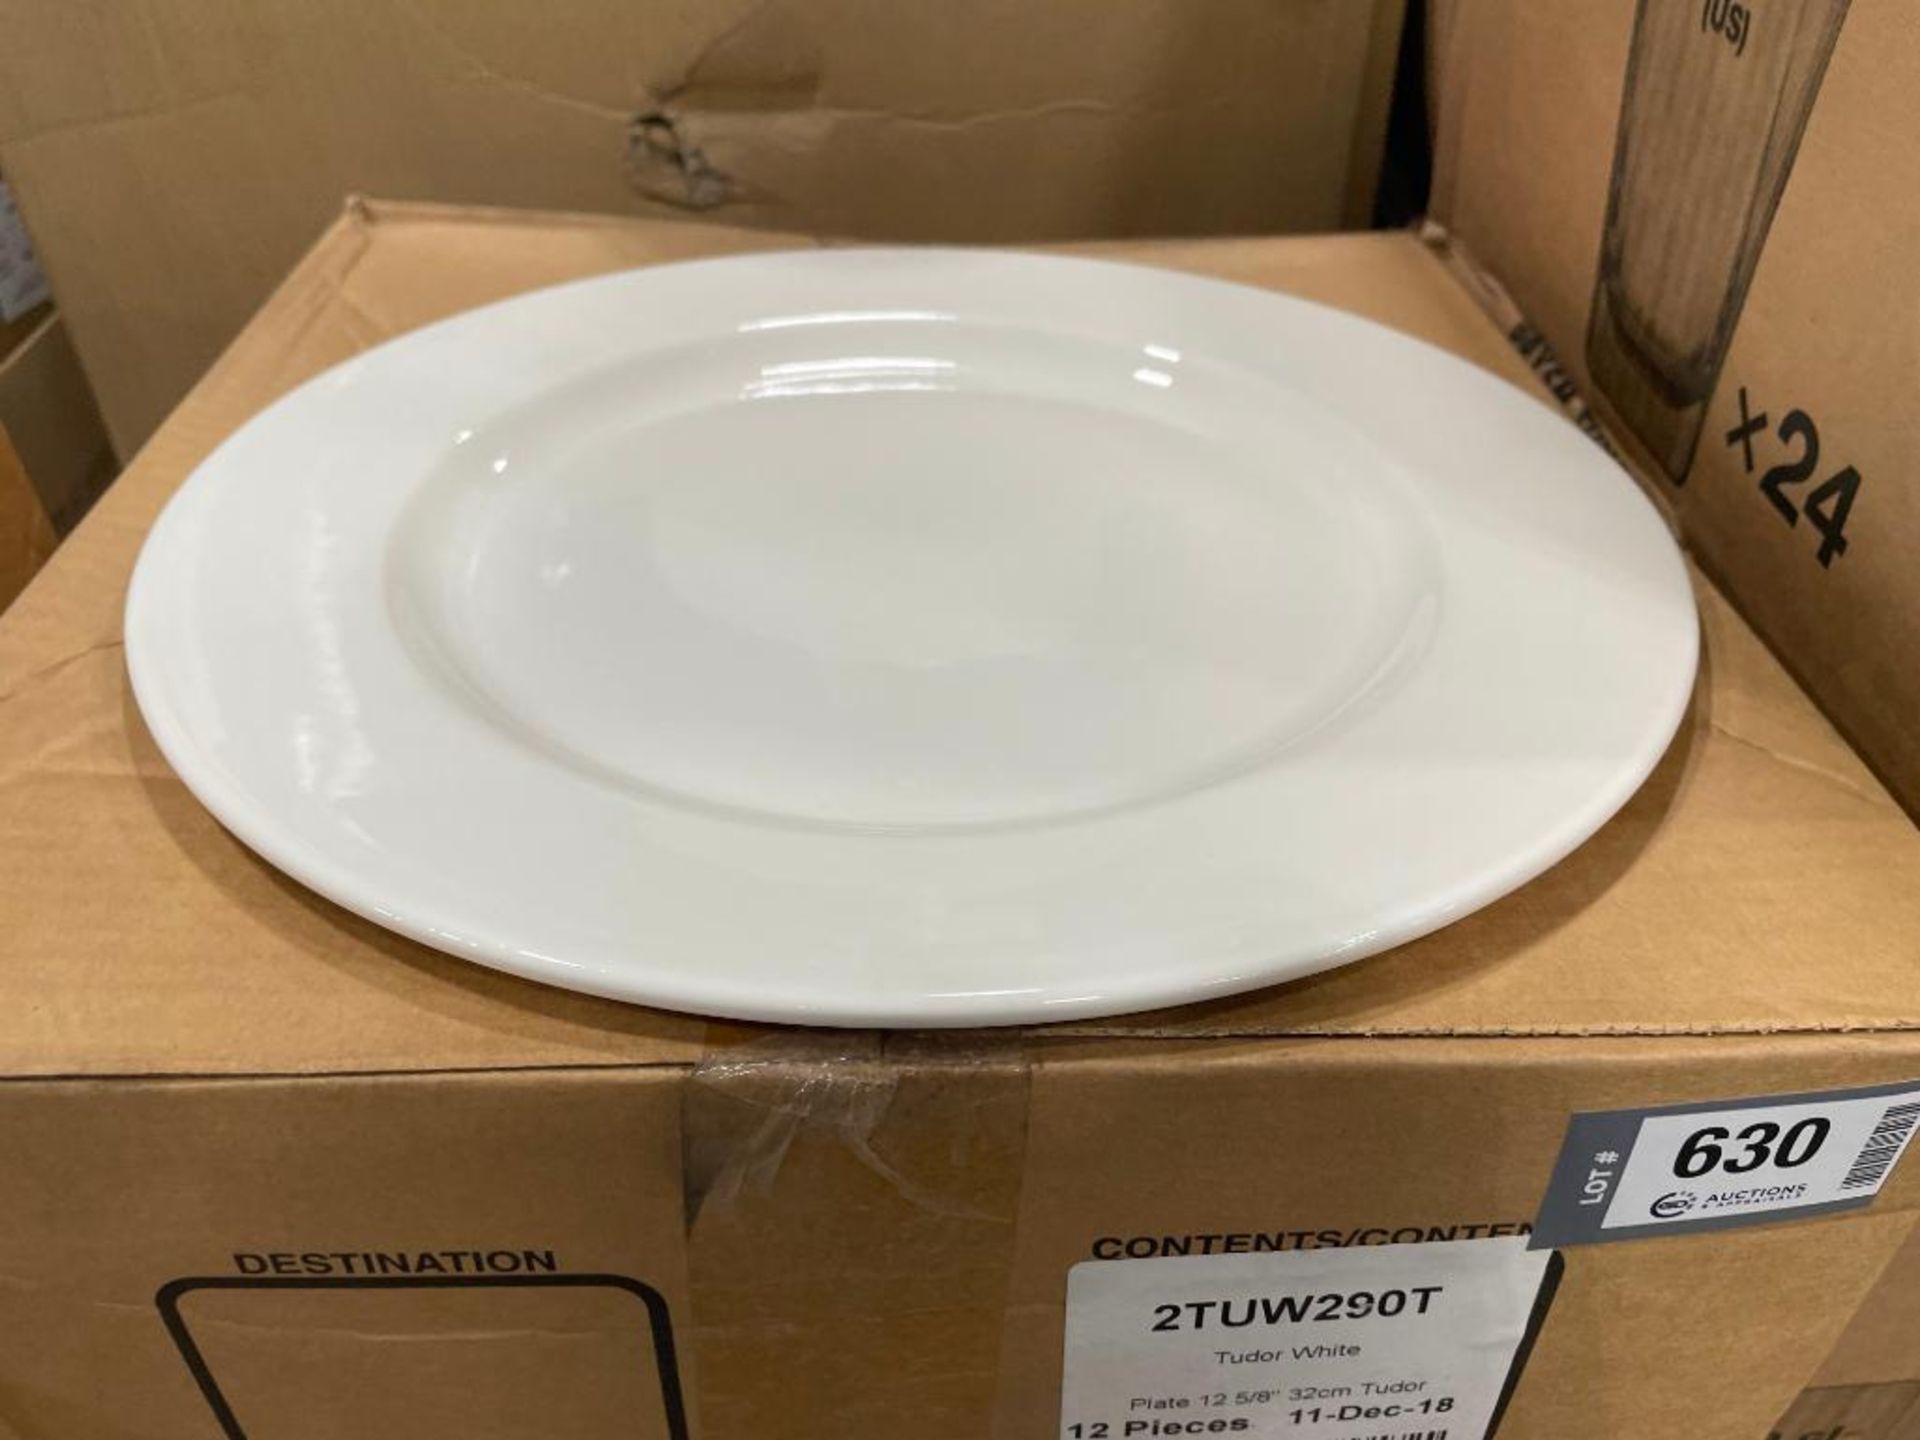 3 CASES OF DUDSON TUDOR WHITE WIDE RIM PLATES 12" - 12/CASE, MADE IN ENGLAND